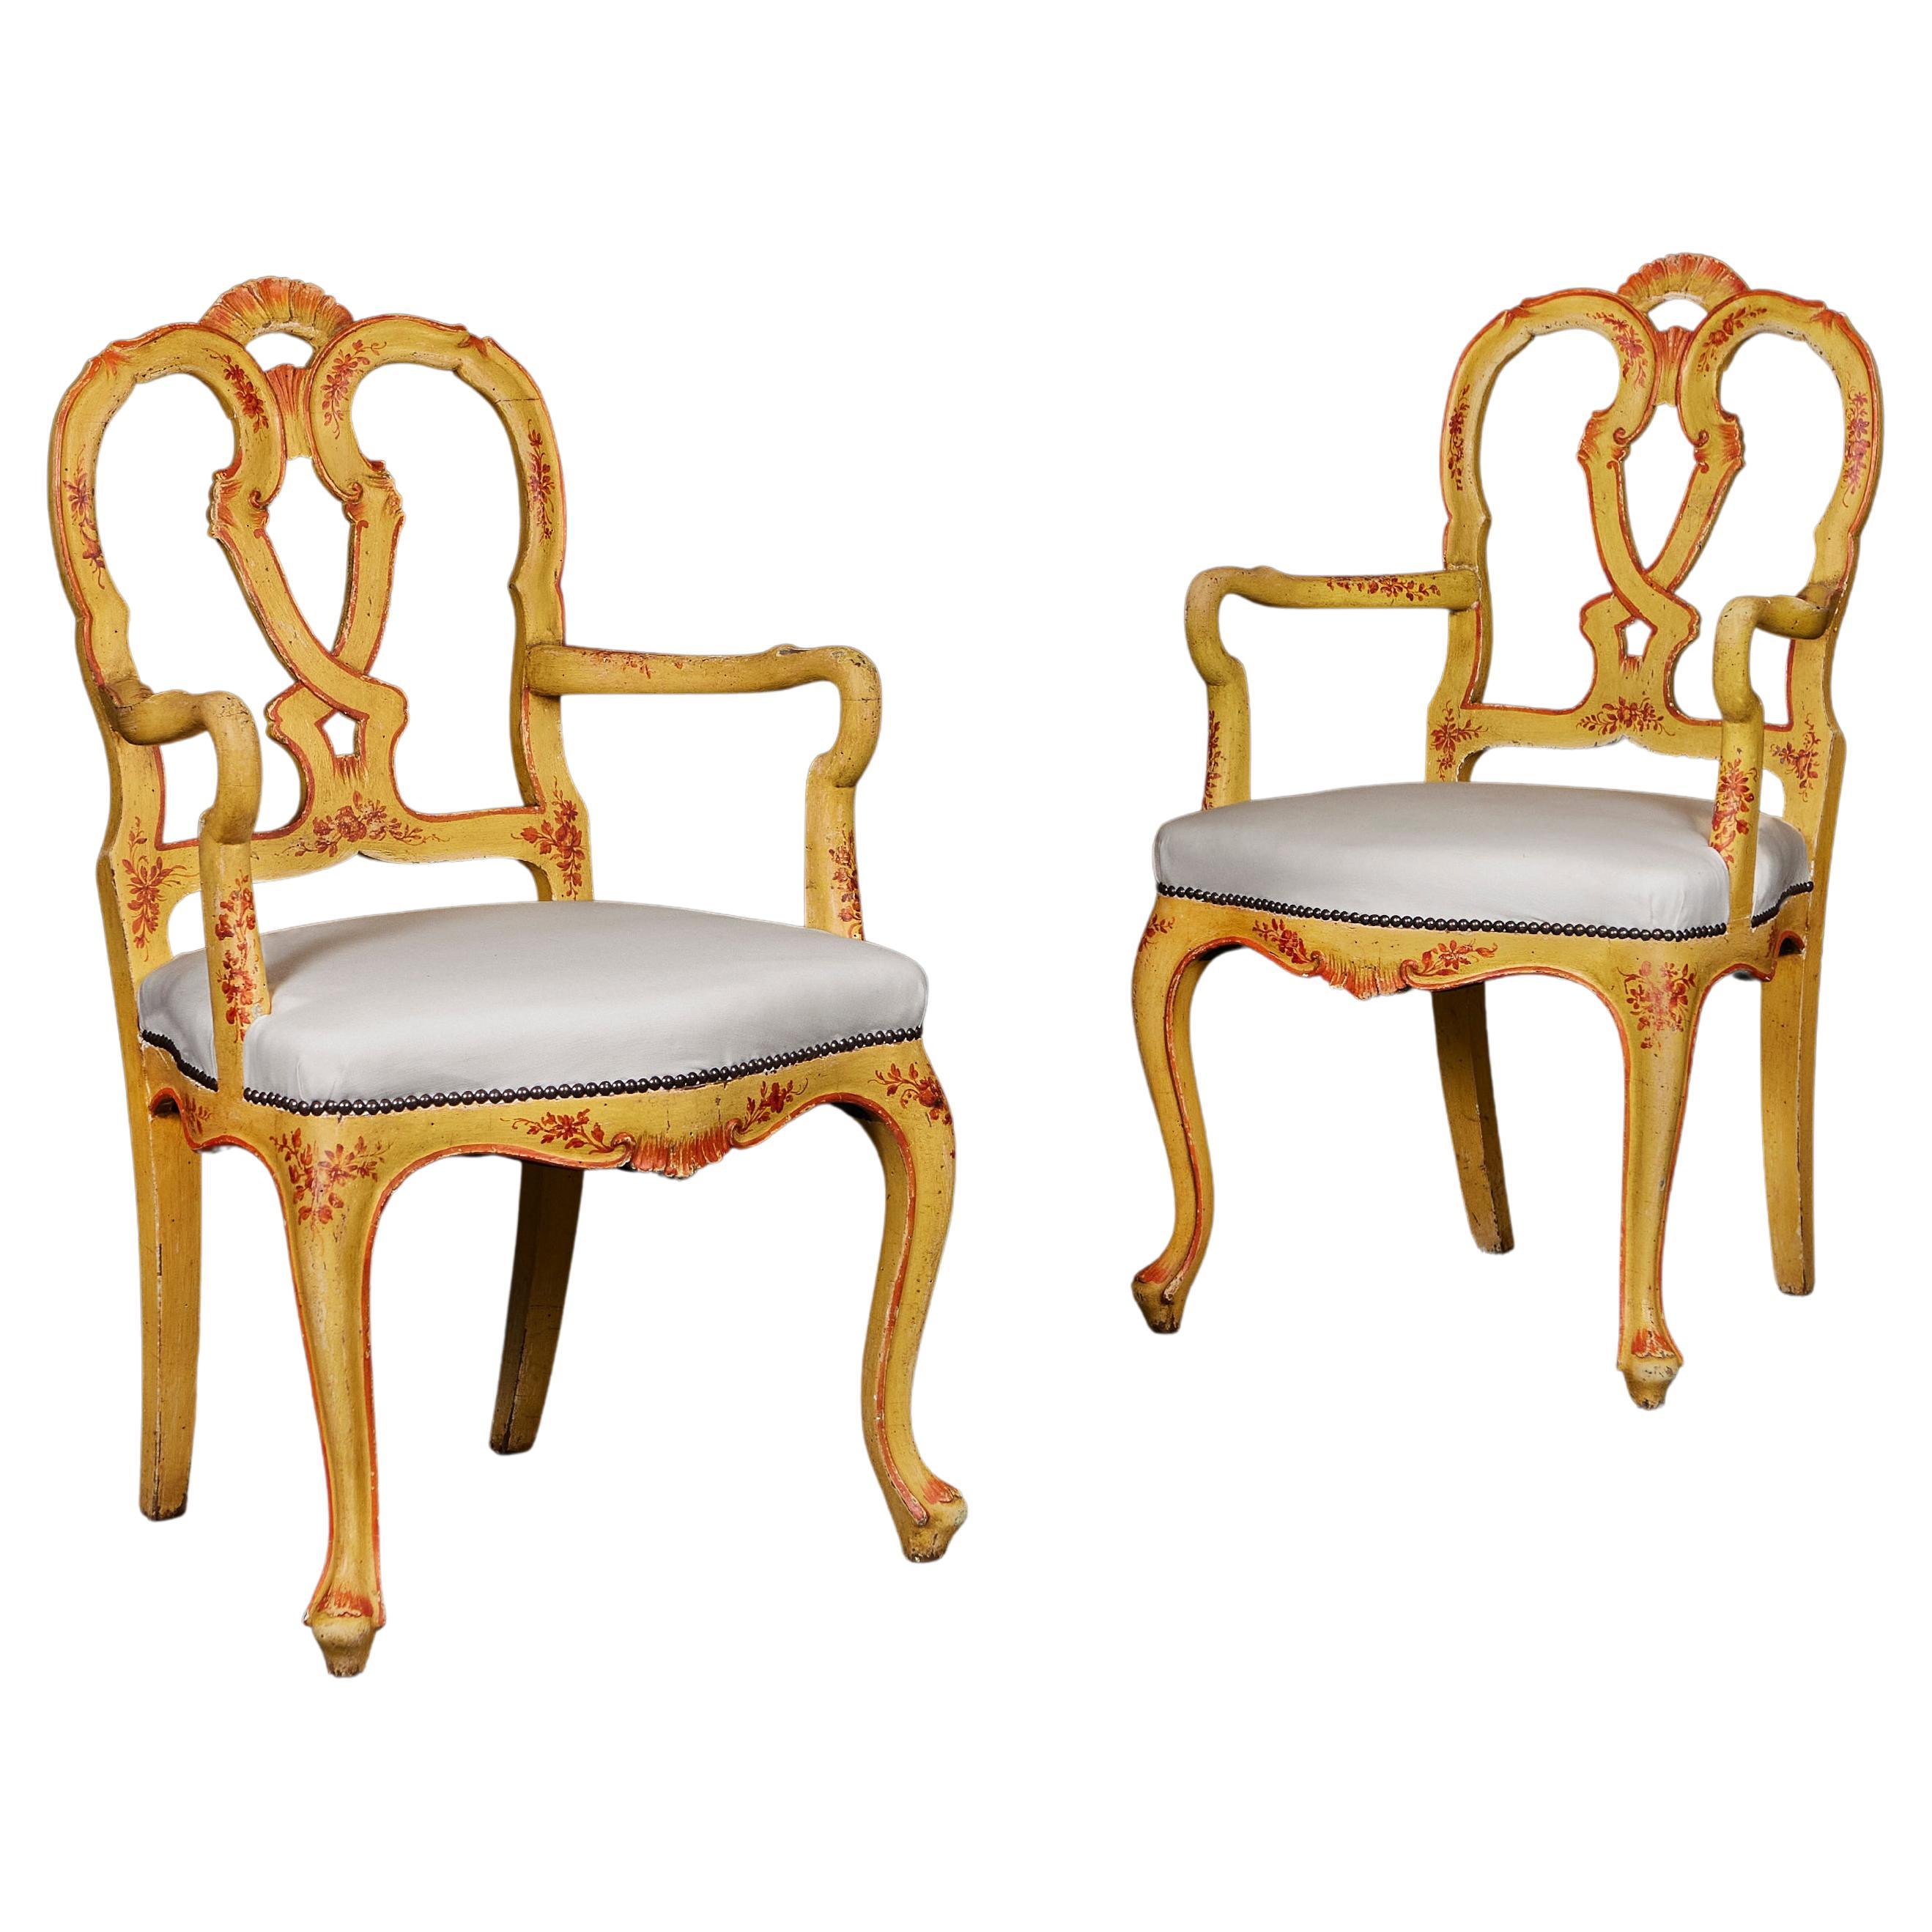 A Pair of 19th Century Painted Venetian Armchairs For Sale